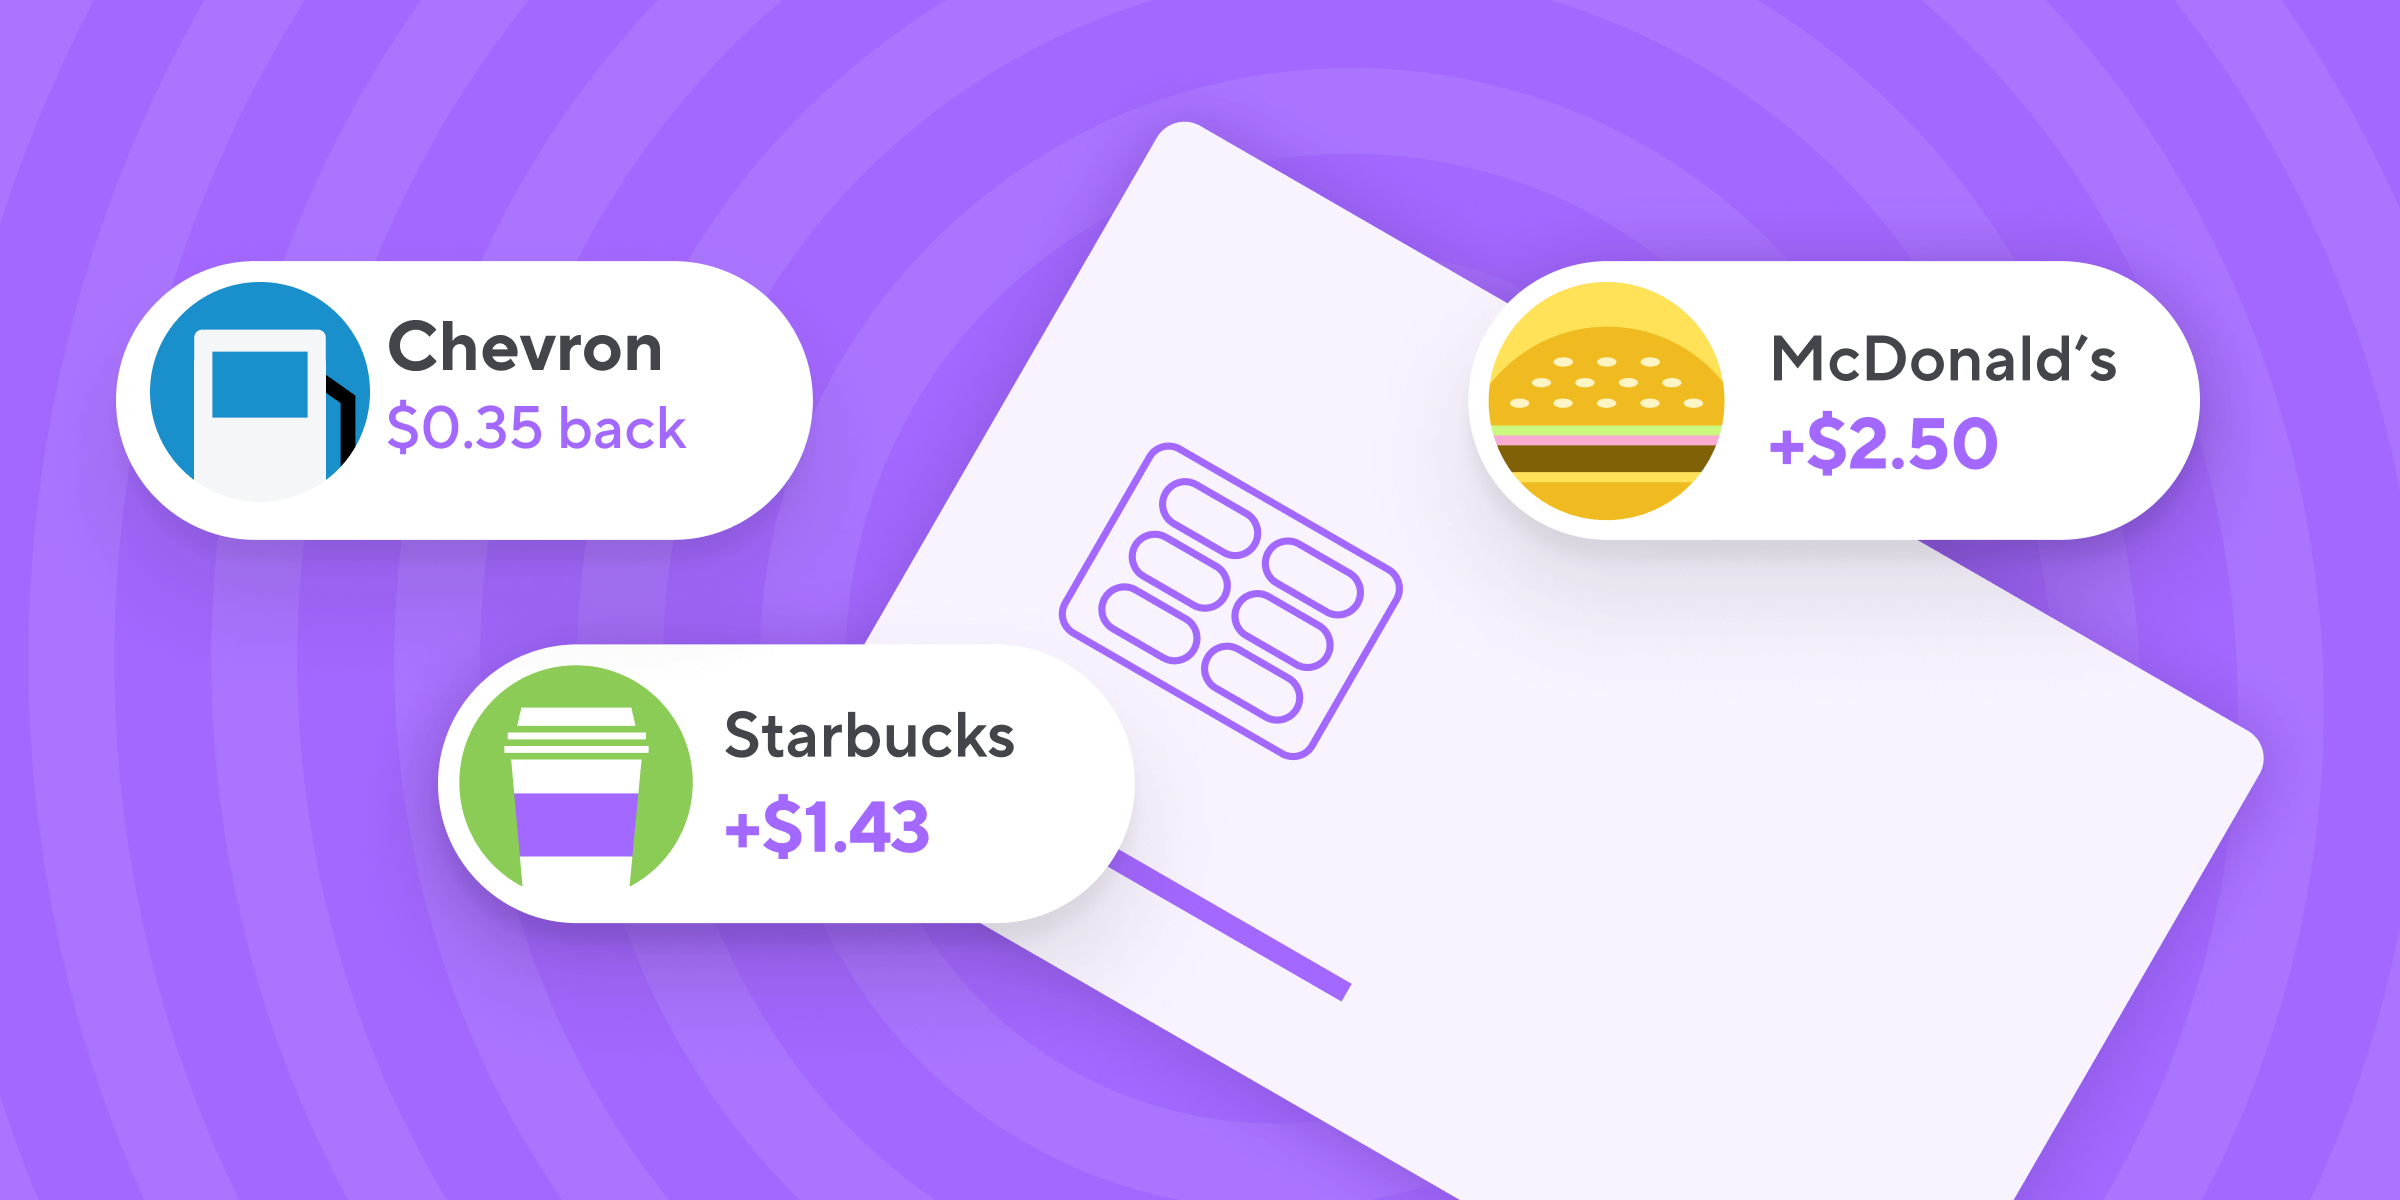 Introducing: Earn In-Store with Card Boosts on Lolli!